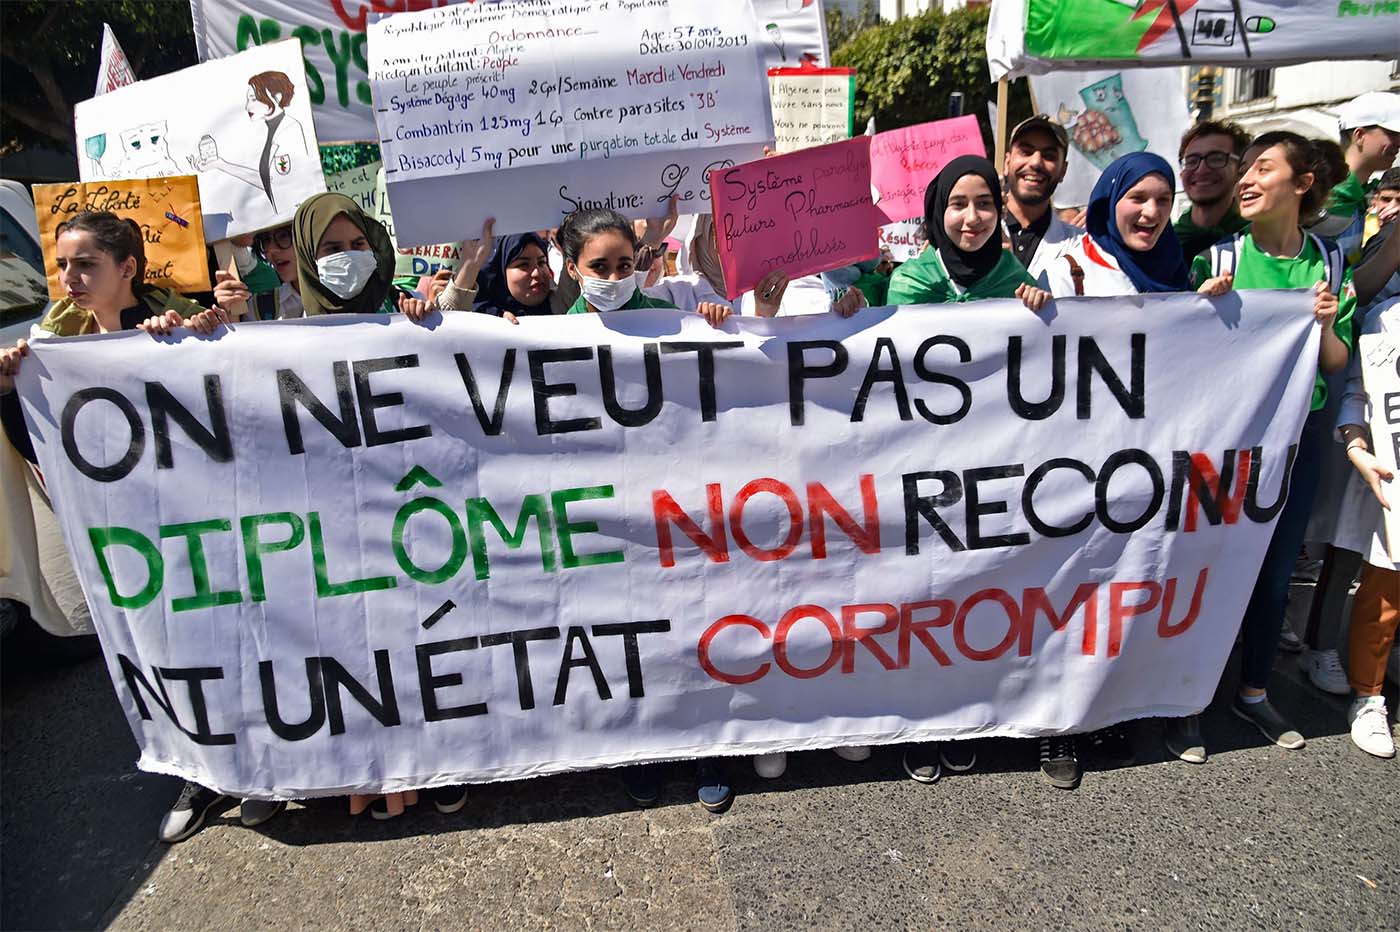 The banner reads in French "We do not want a non-recognised degree nor a corrupted government"